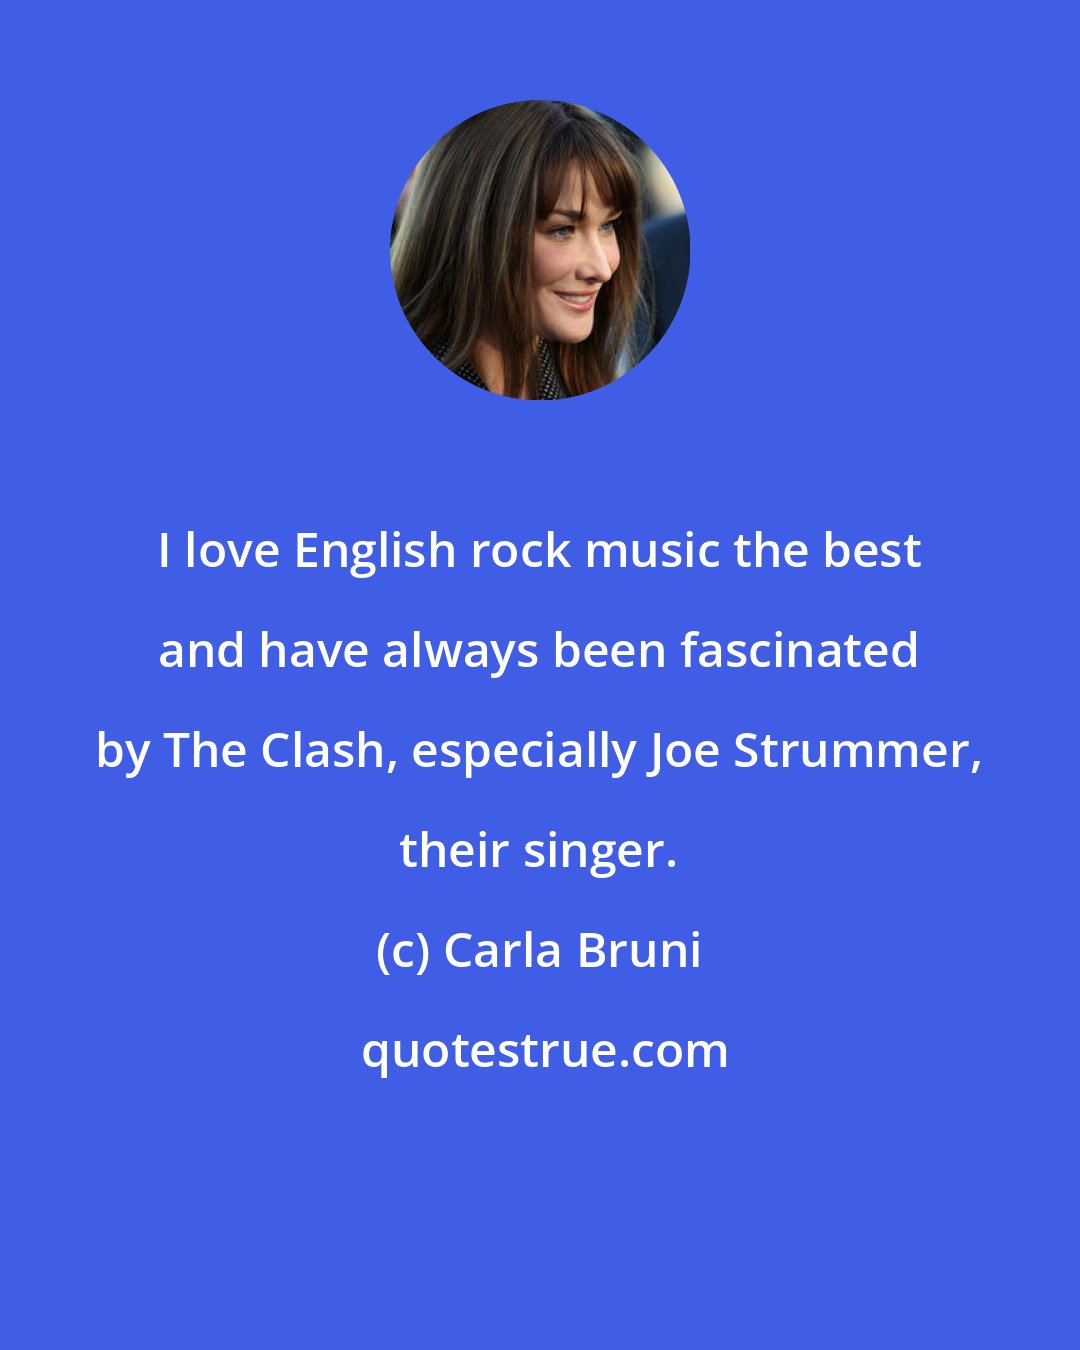 Carla Bruni: I love English rock music the best and have always been fascinated by The Clash, especially Joe Strummer, their singer.